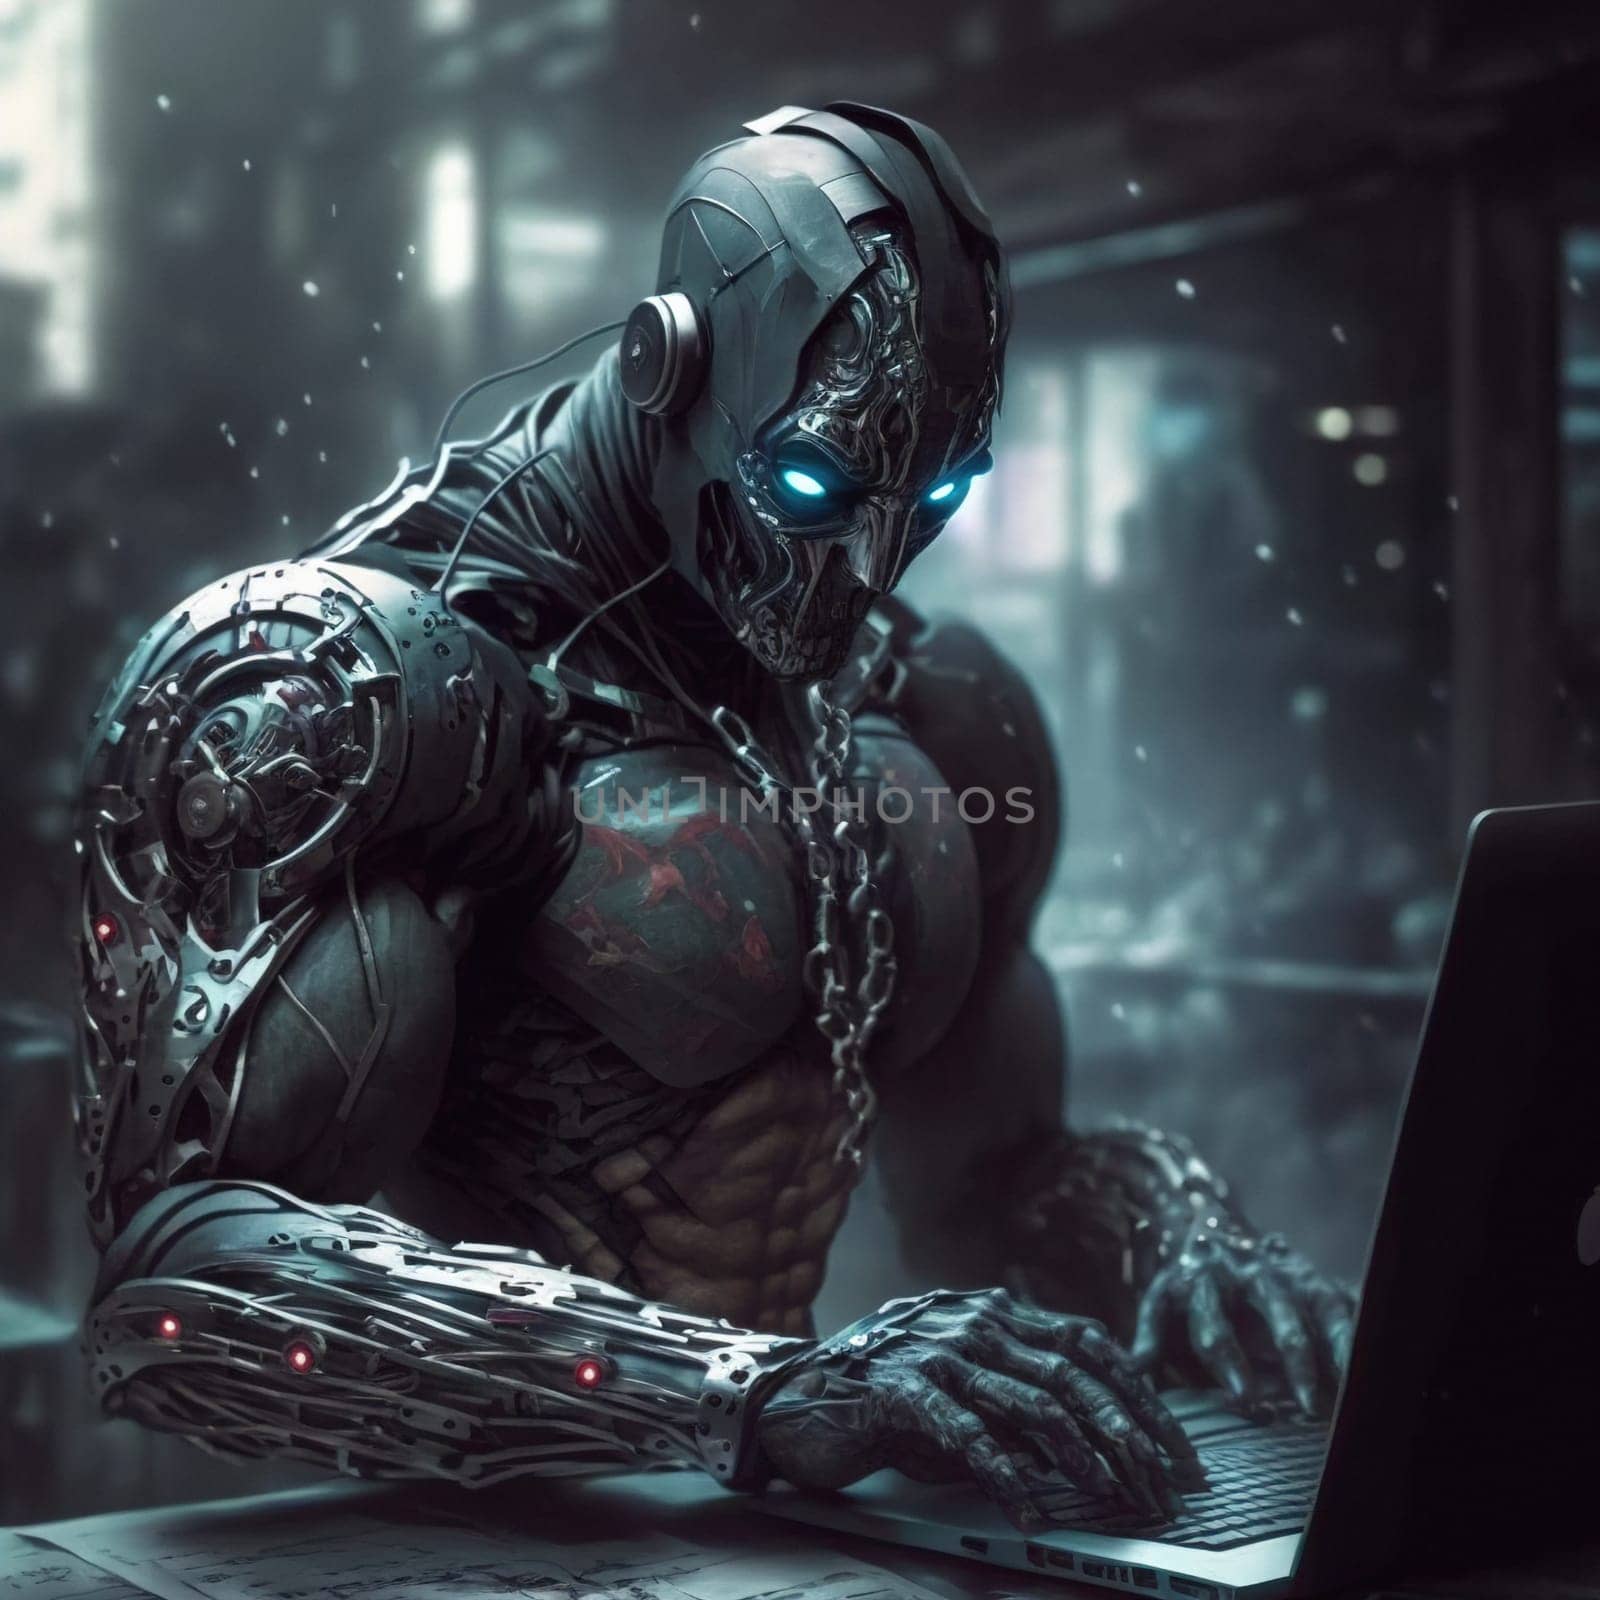 Professional Male Working on Laptop in High-Tech Environment with a Futuristic Vibe download